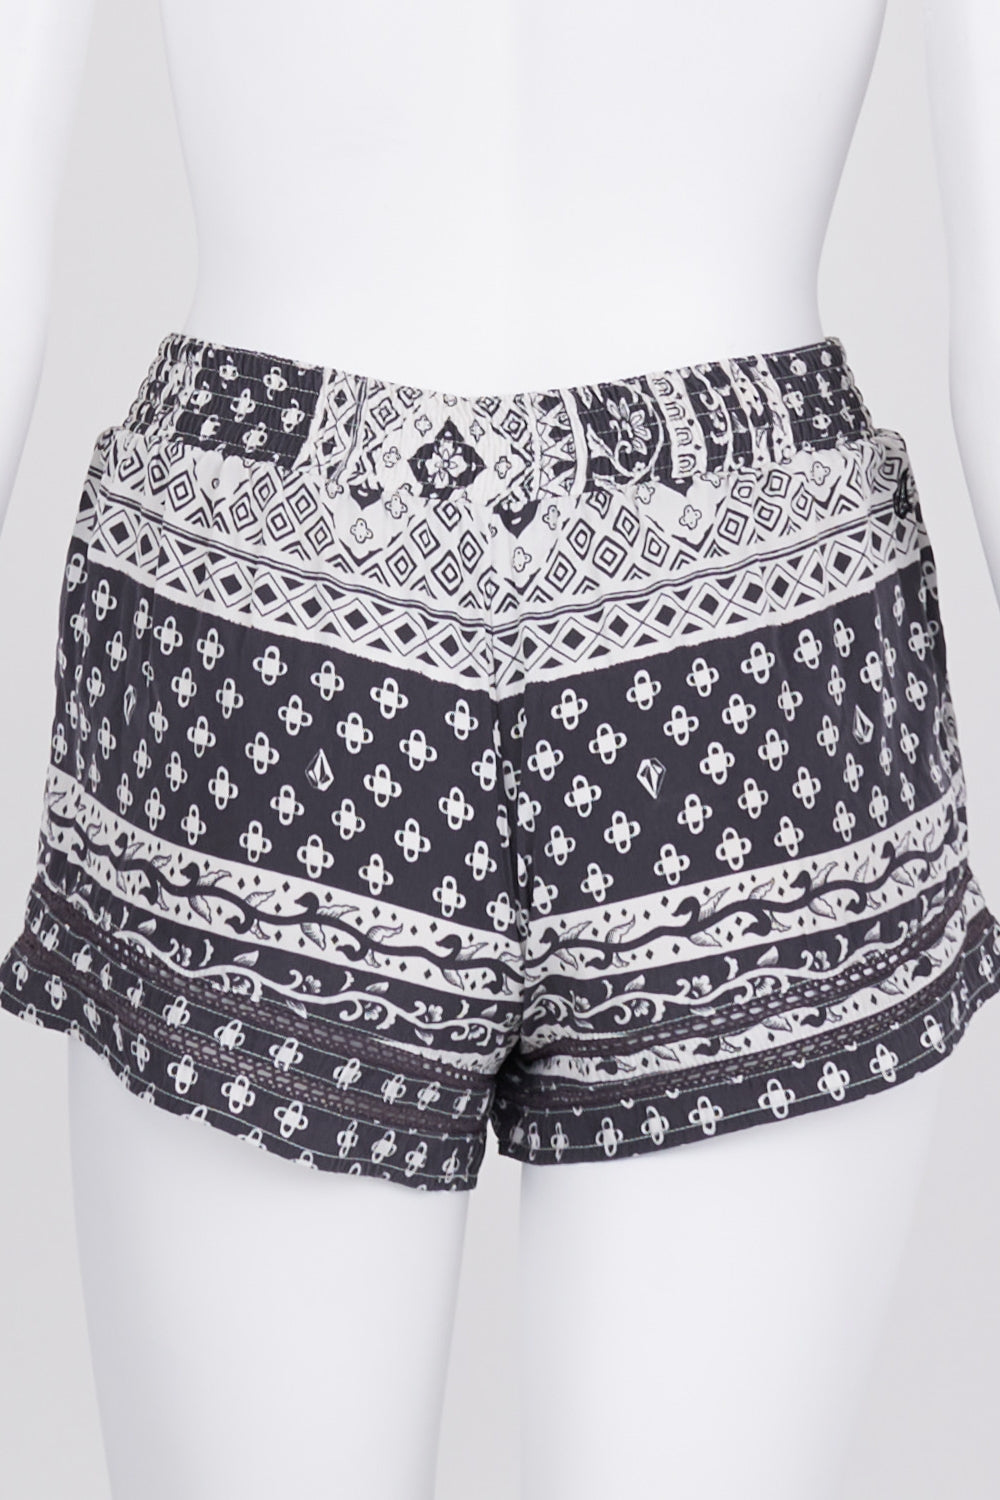 Volcom Grey And White Patterned Shorts 8